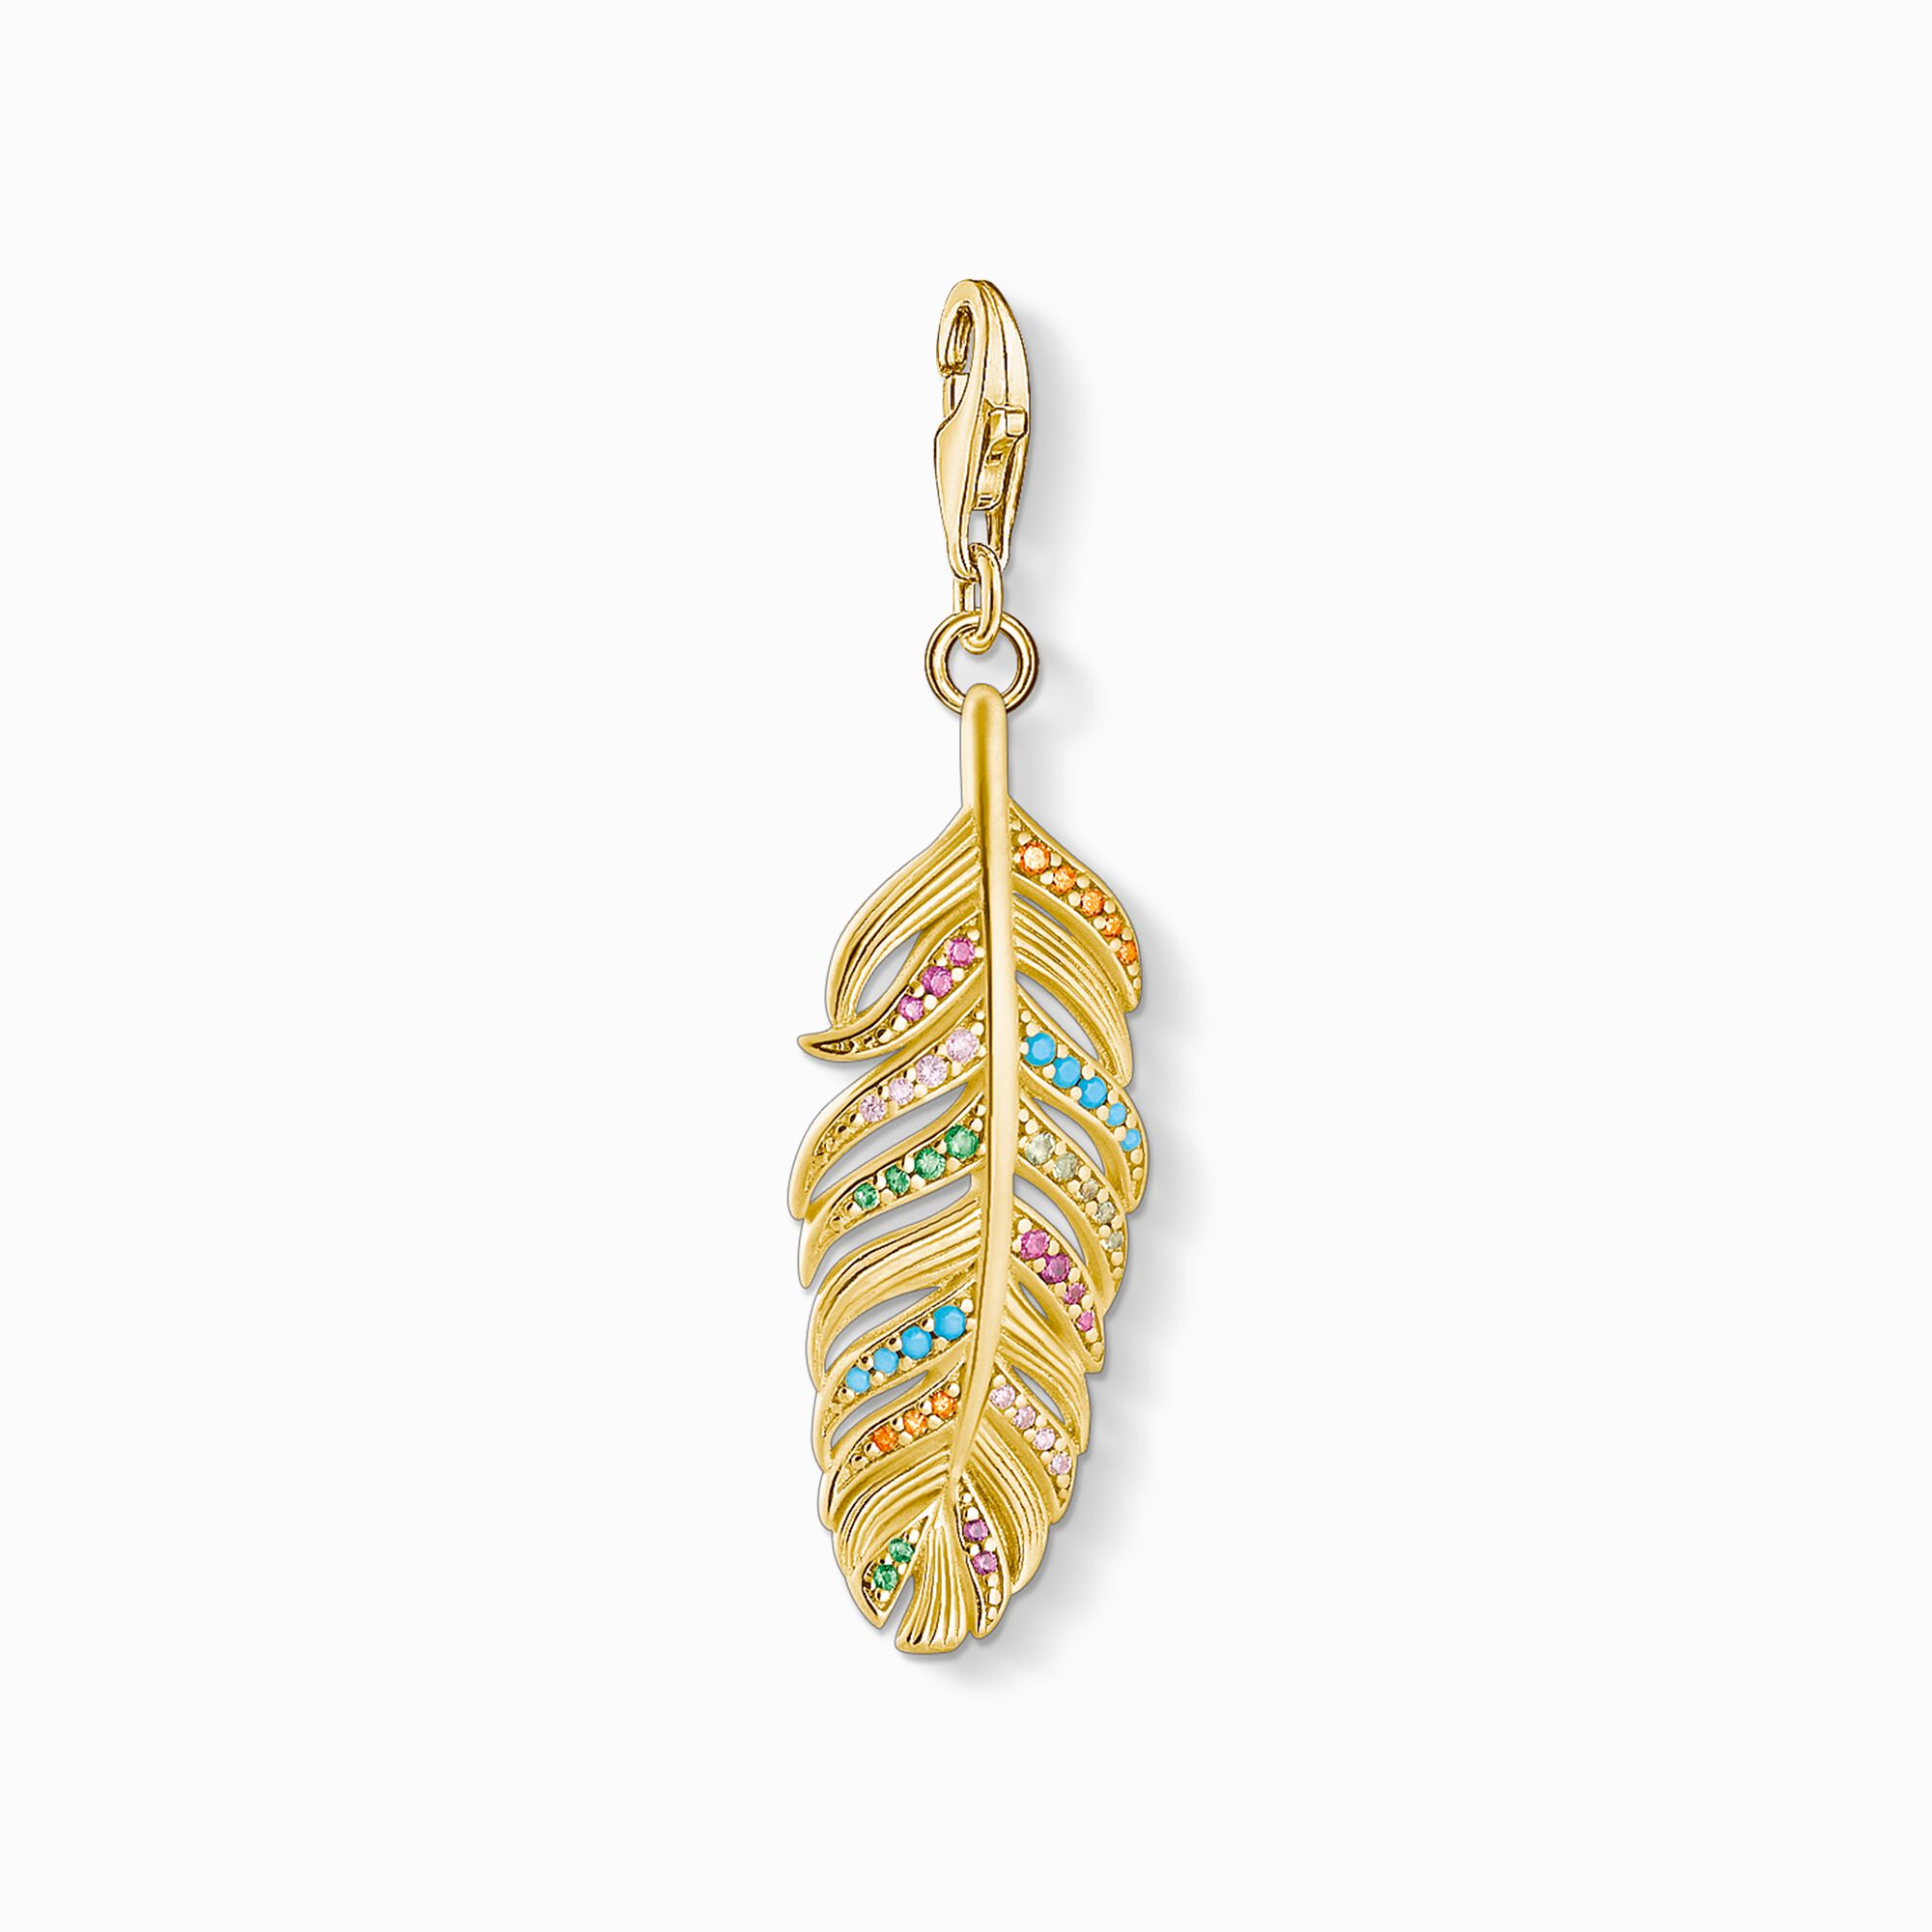 charm pendant feather gold from the Charm Club collection in the THOMAS SABO online store